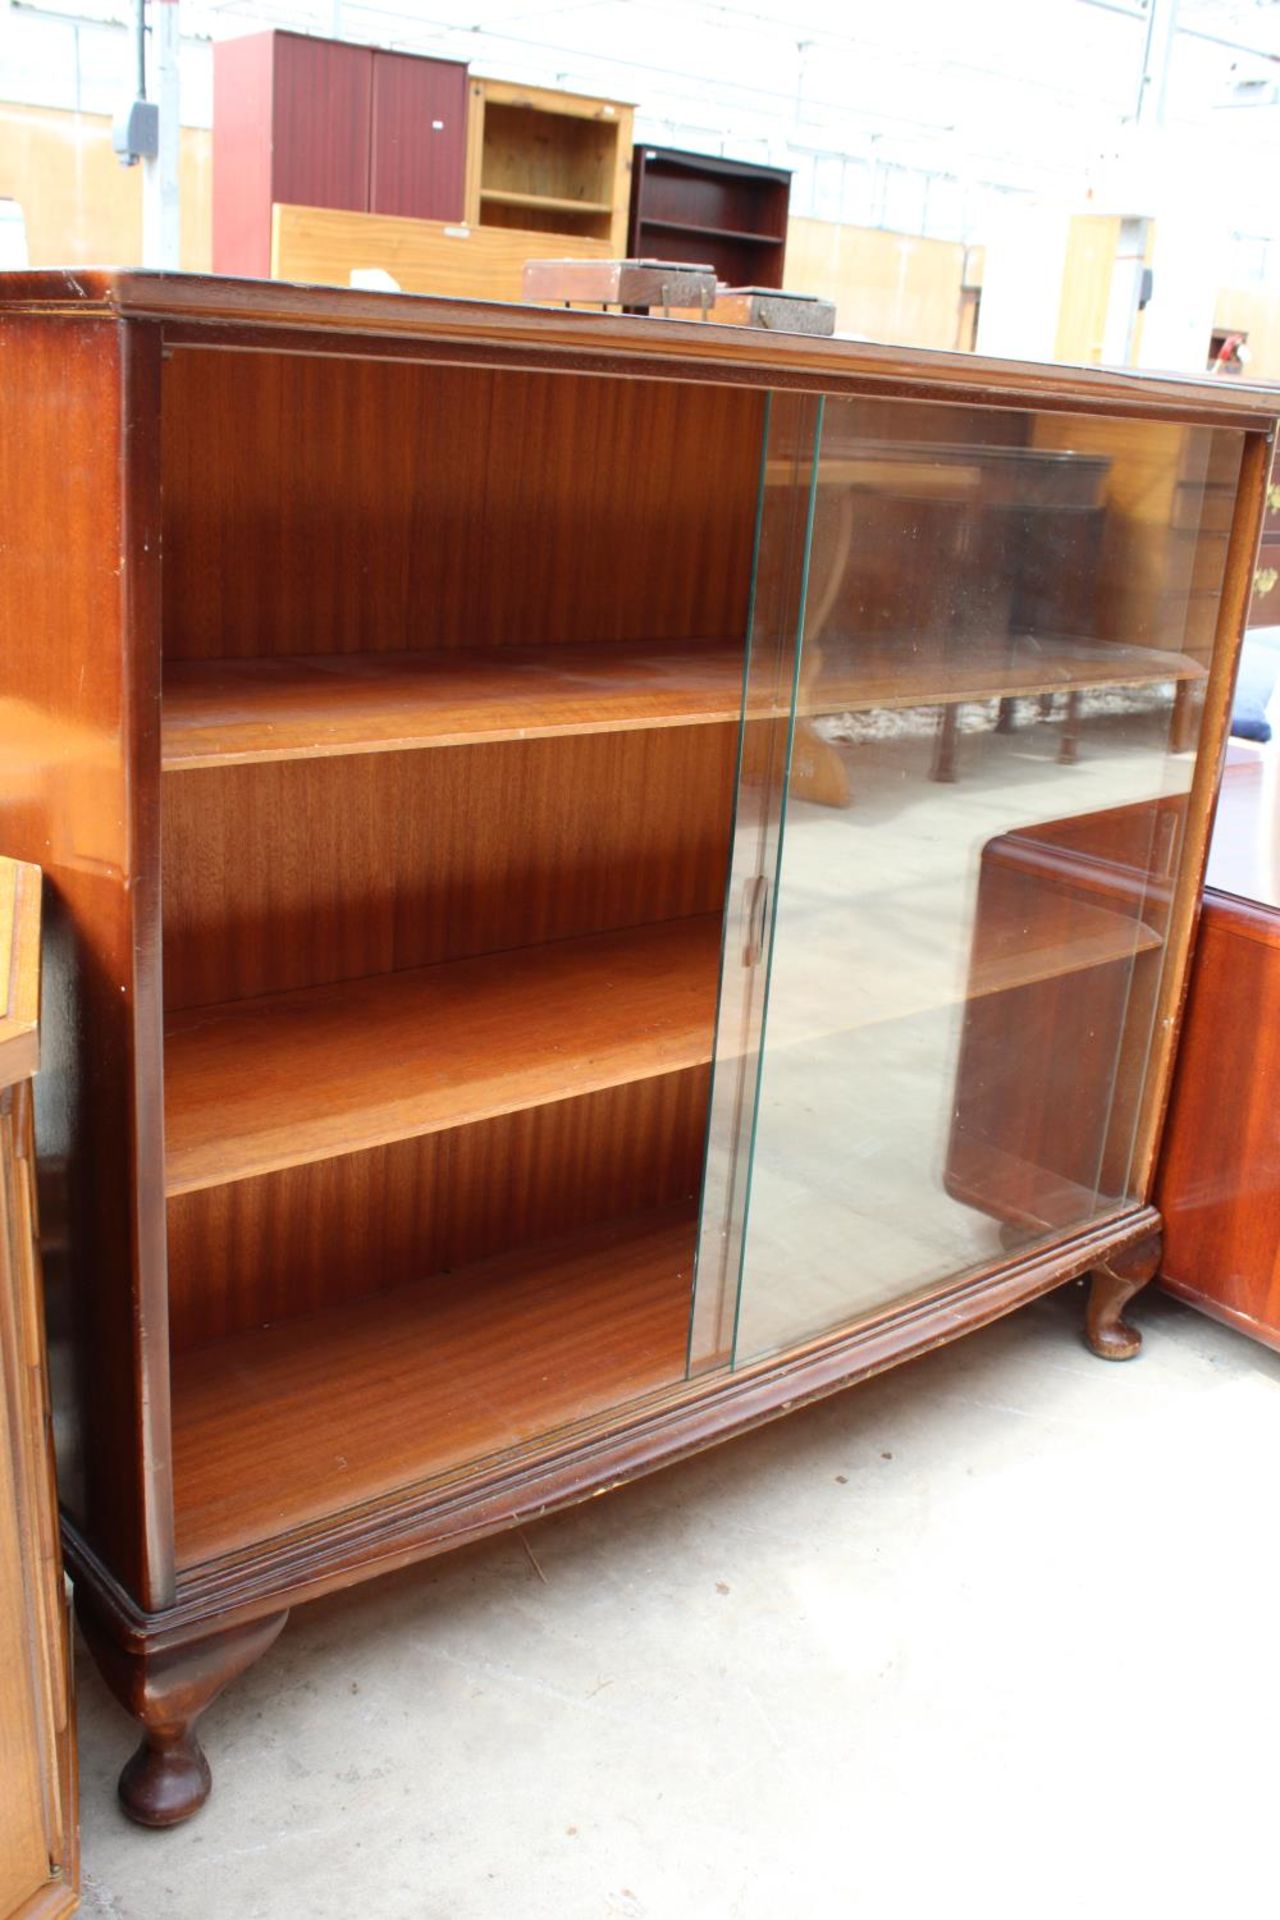 A MID 20TH CENTURY MAHOGANY BOOKCASE WITH 2 GLASS SLIDING DOORS ON CABRIOLE LEGS, 39" WIDE - Image 3 of 3